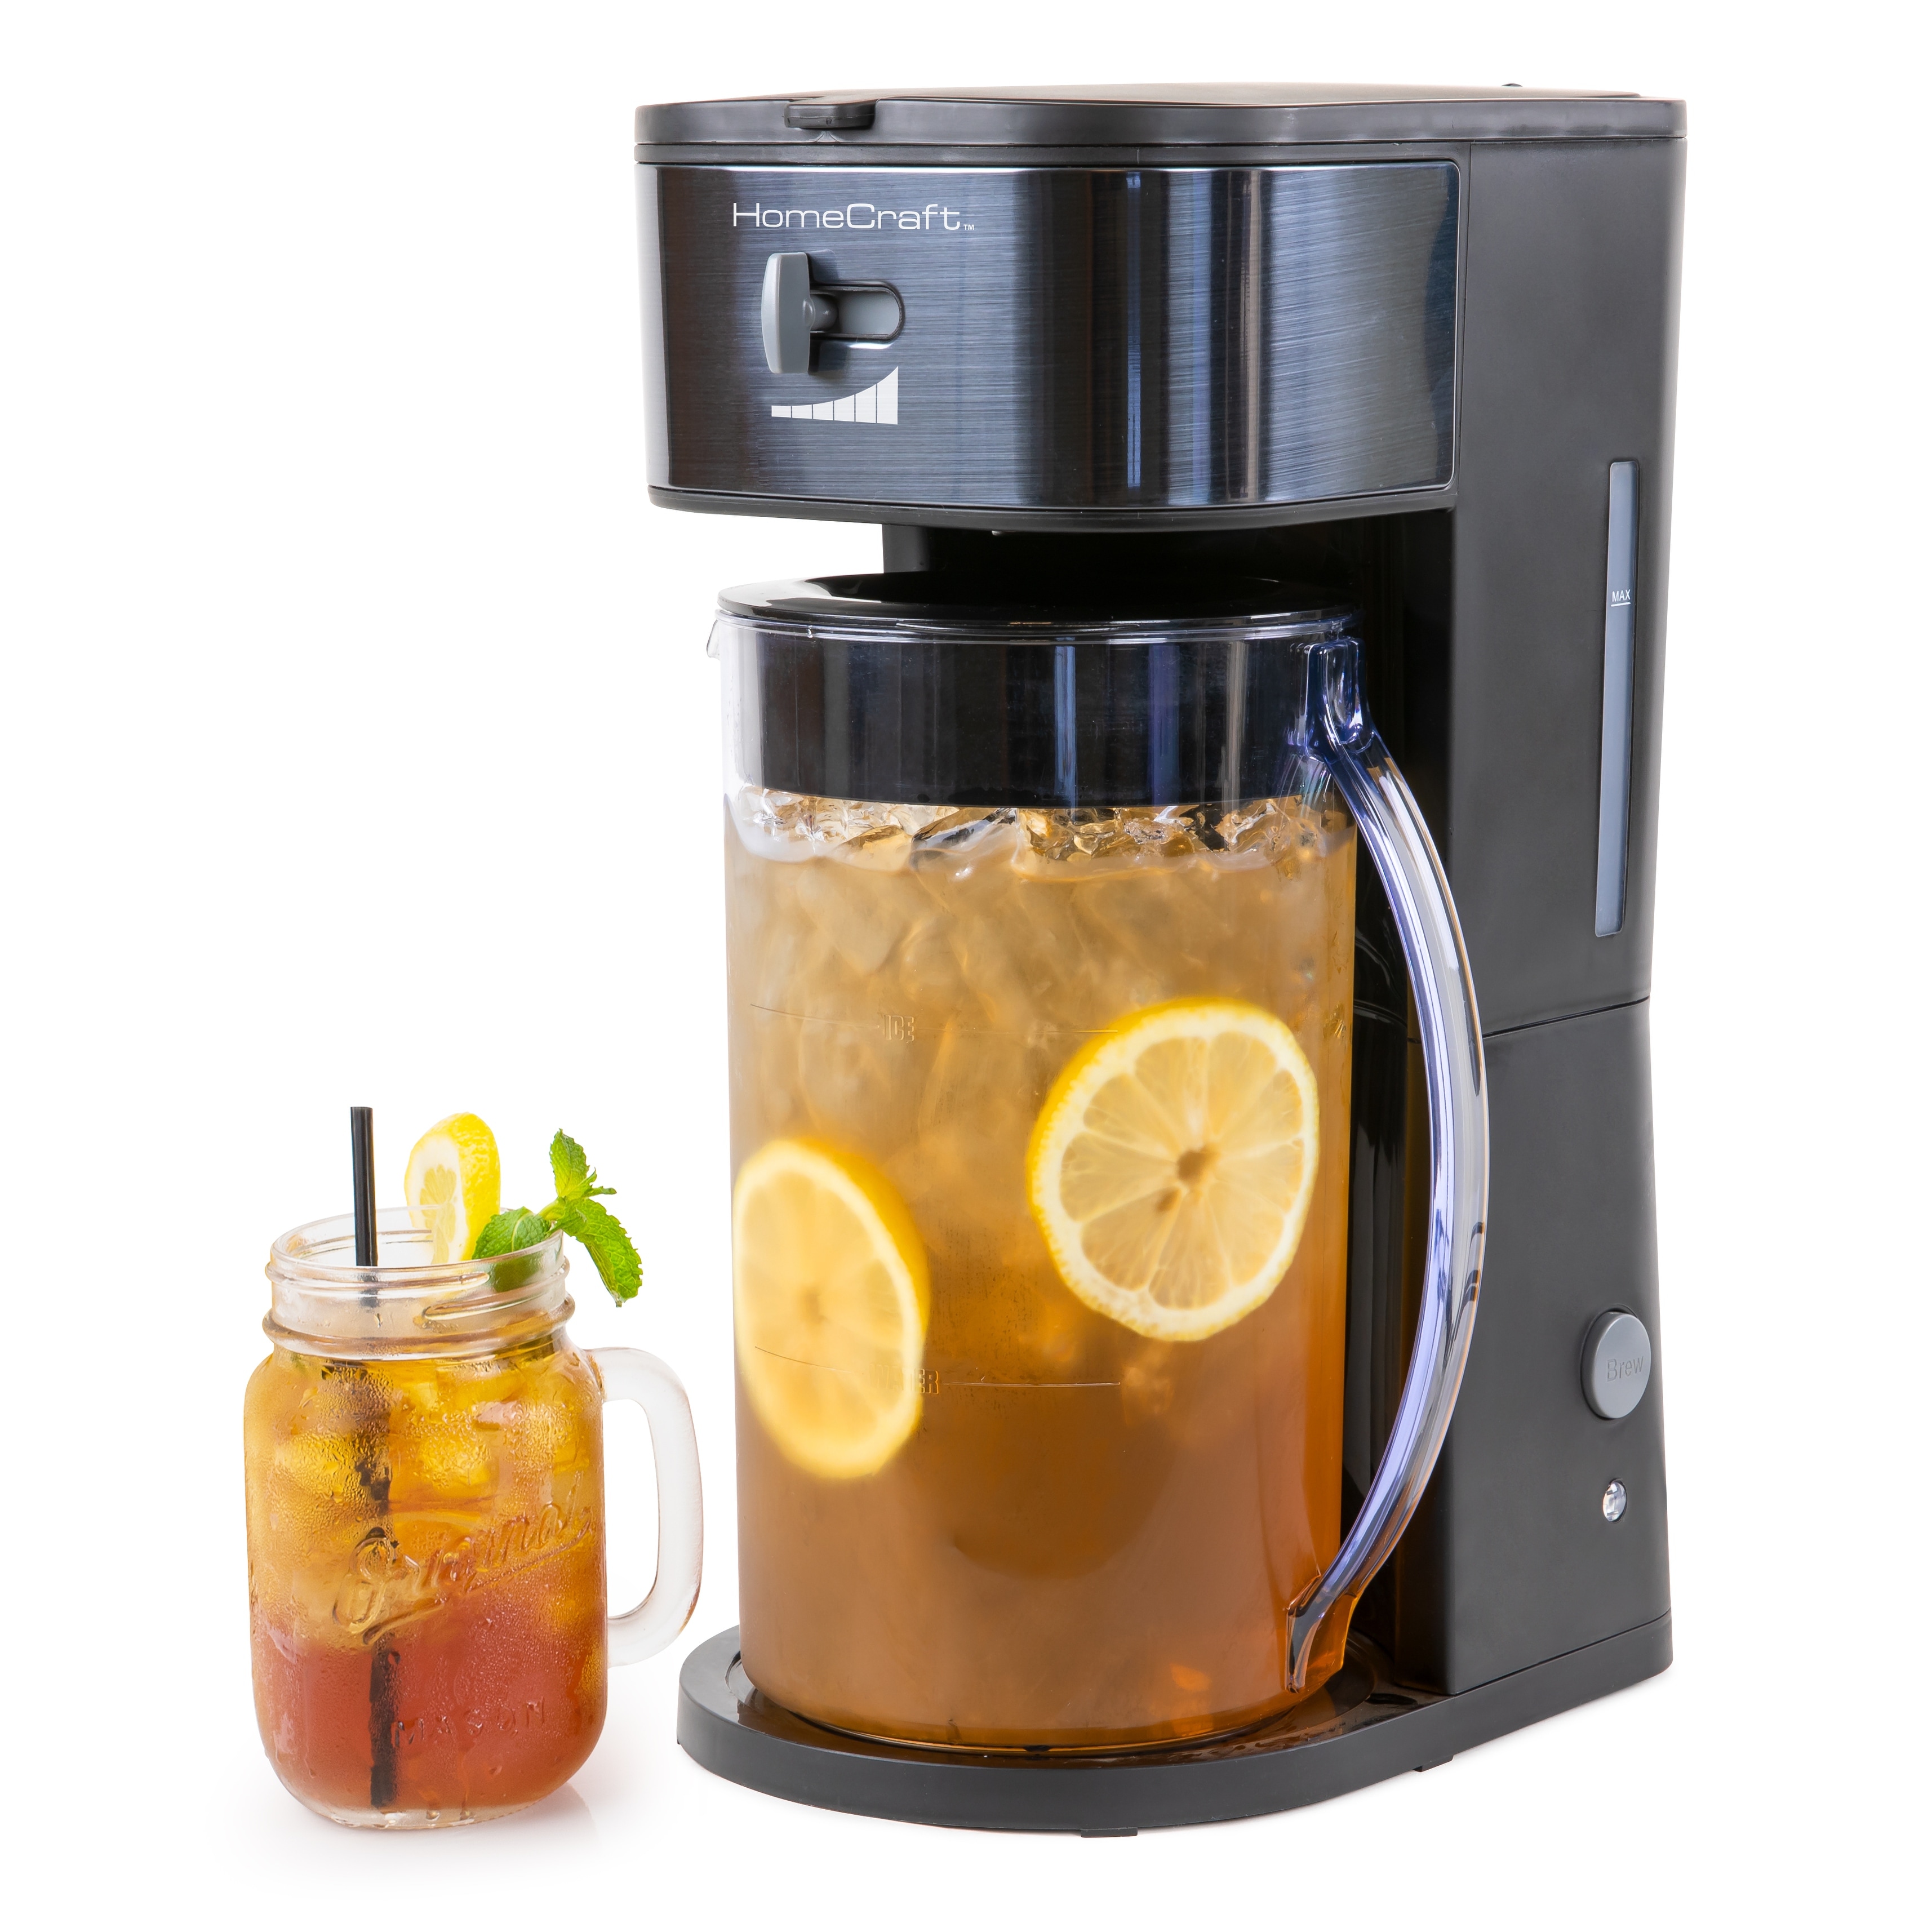 Razorri Electric Tea Maker 1.7L with Automatic Infuser for Tea Brewing,  Stainless Steel Glass Kettle, Presets for 5 Tea Types and 3 Brew Strengths